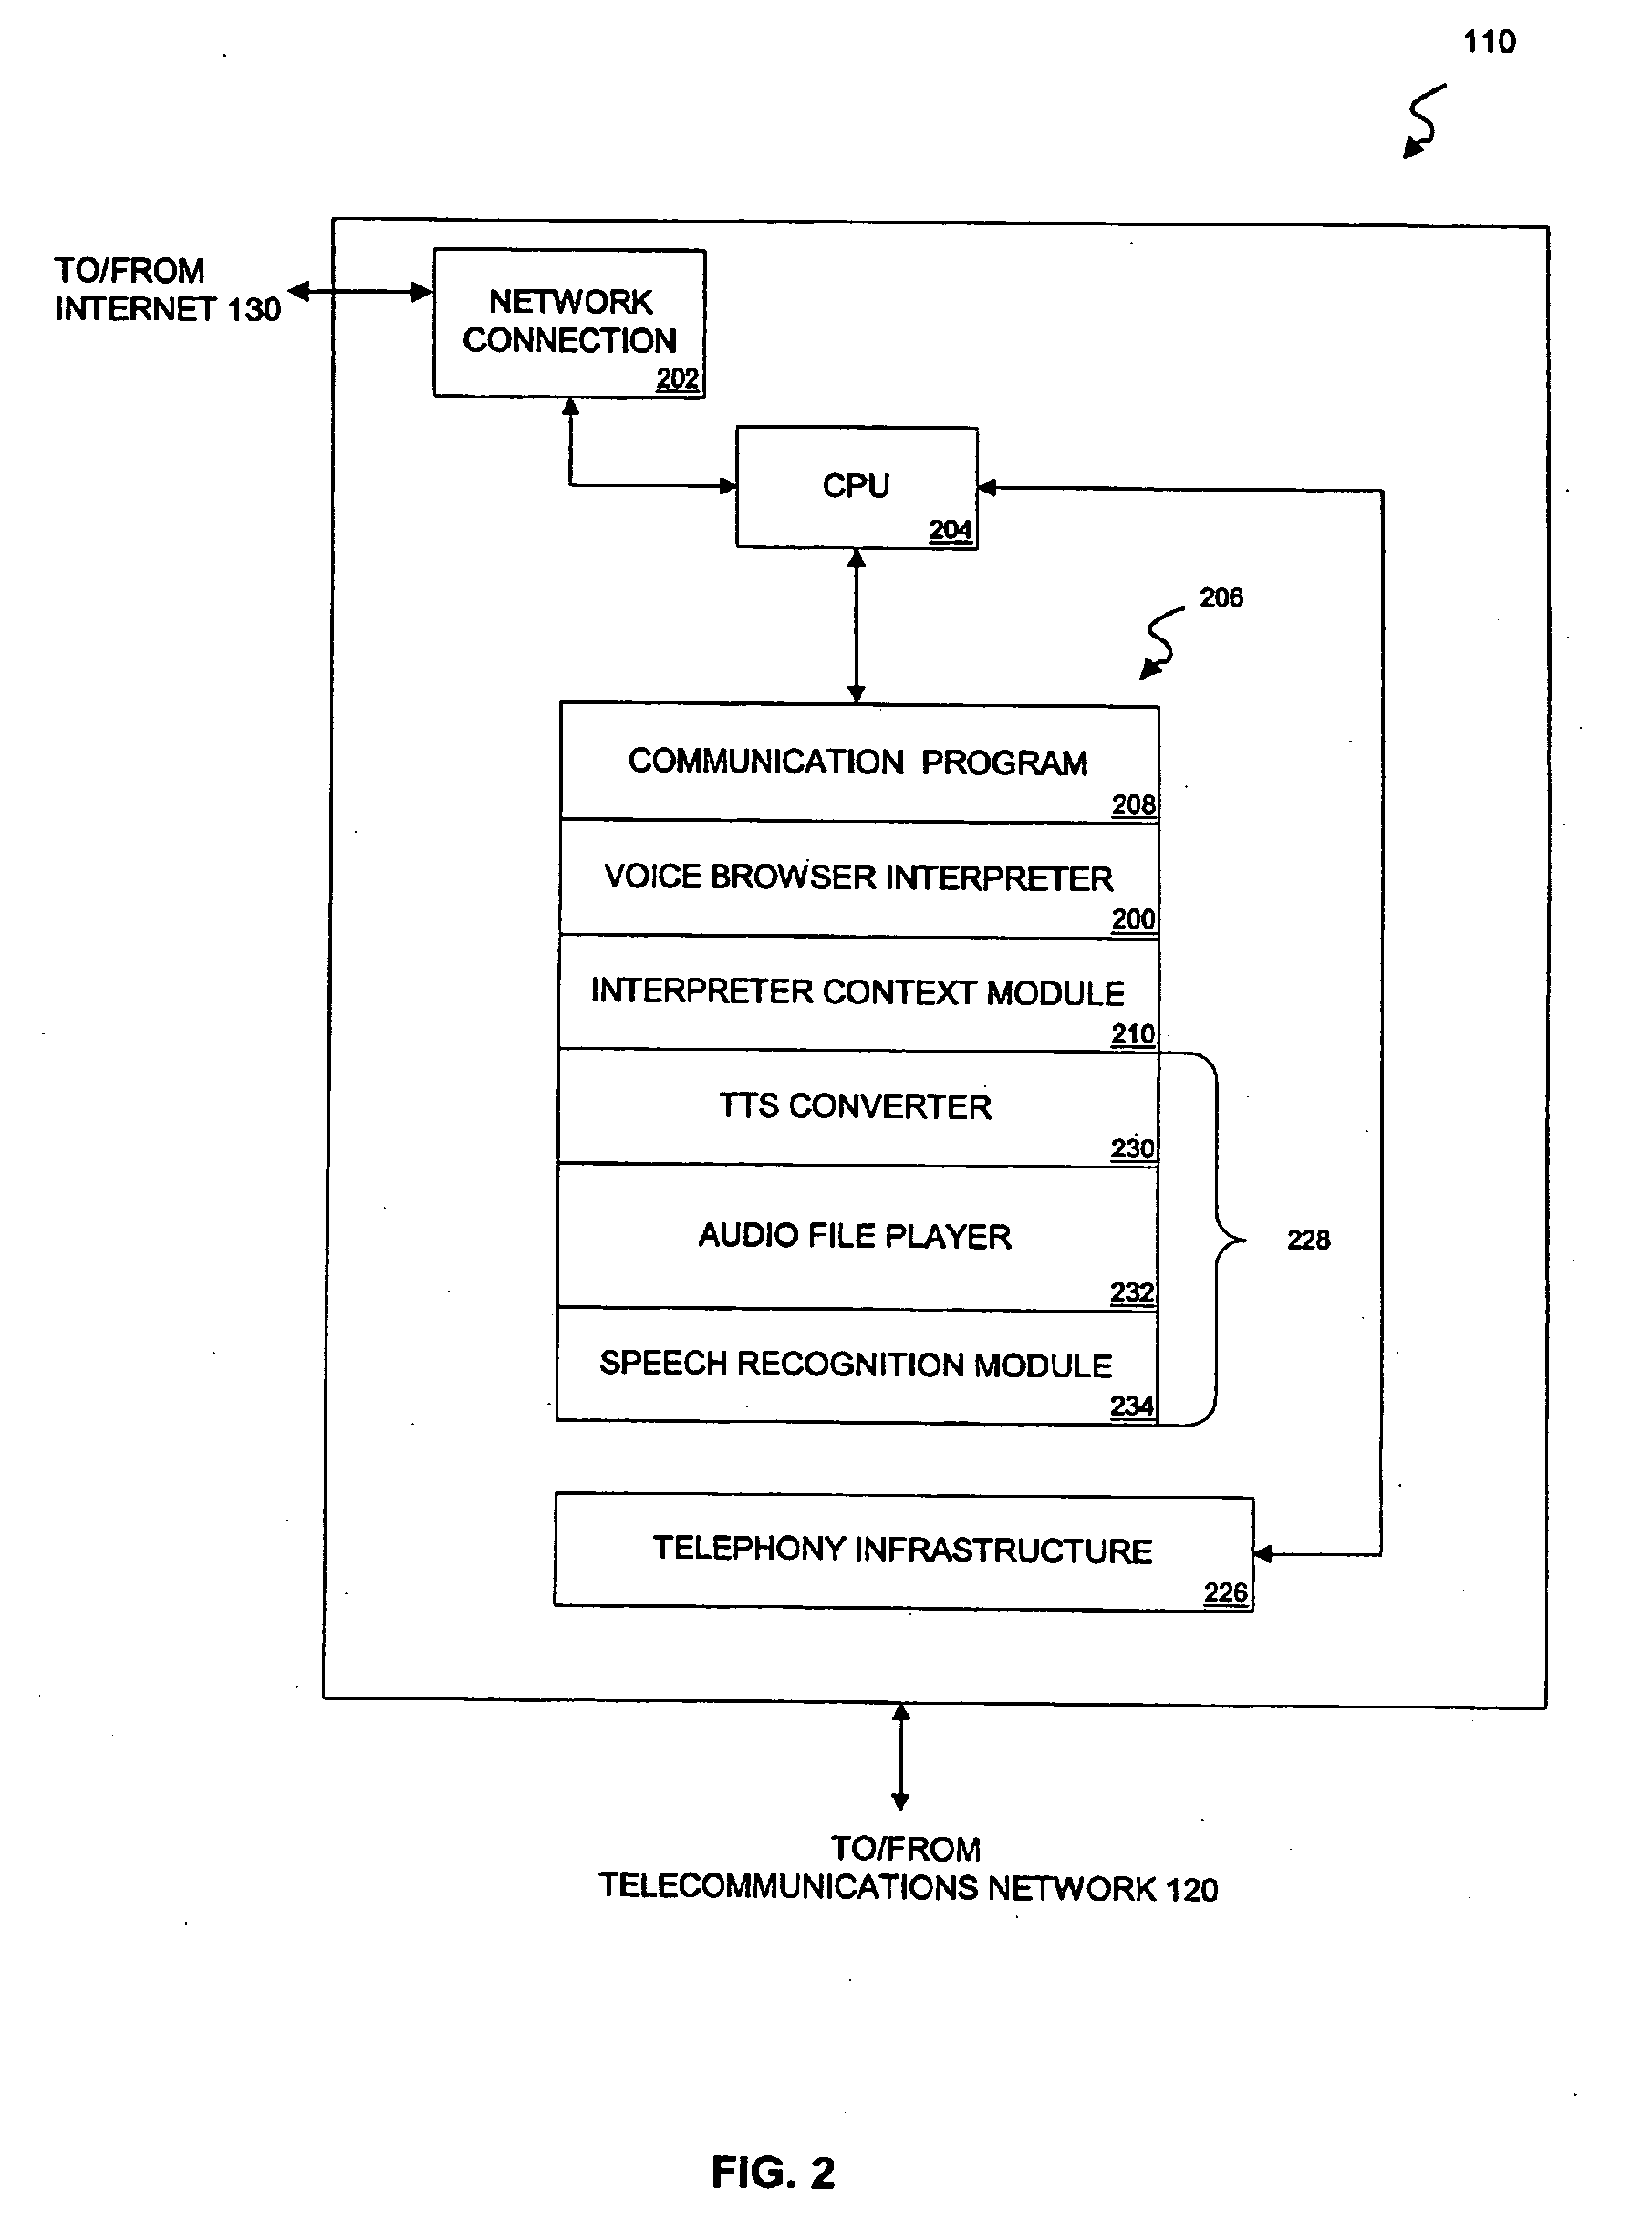 Information retrieval system including voice browser and data conversion server